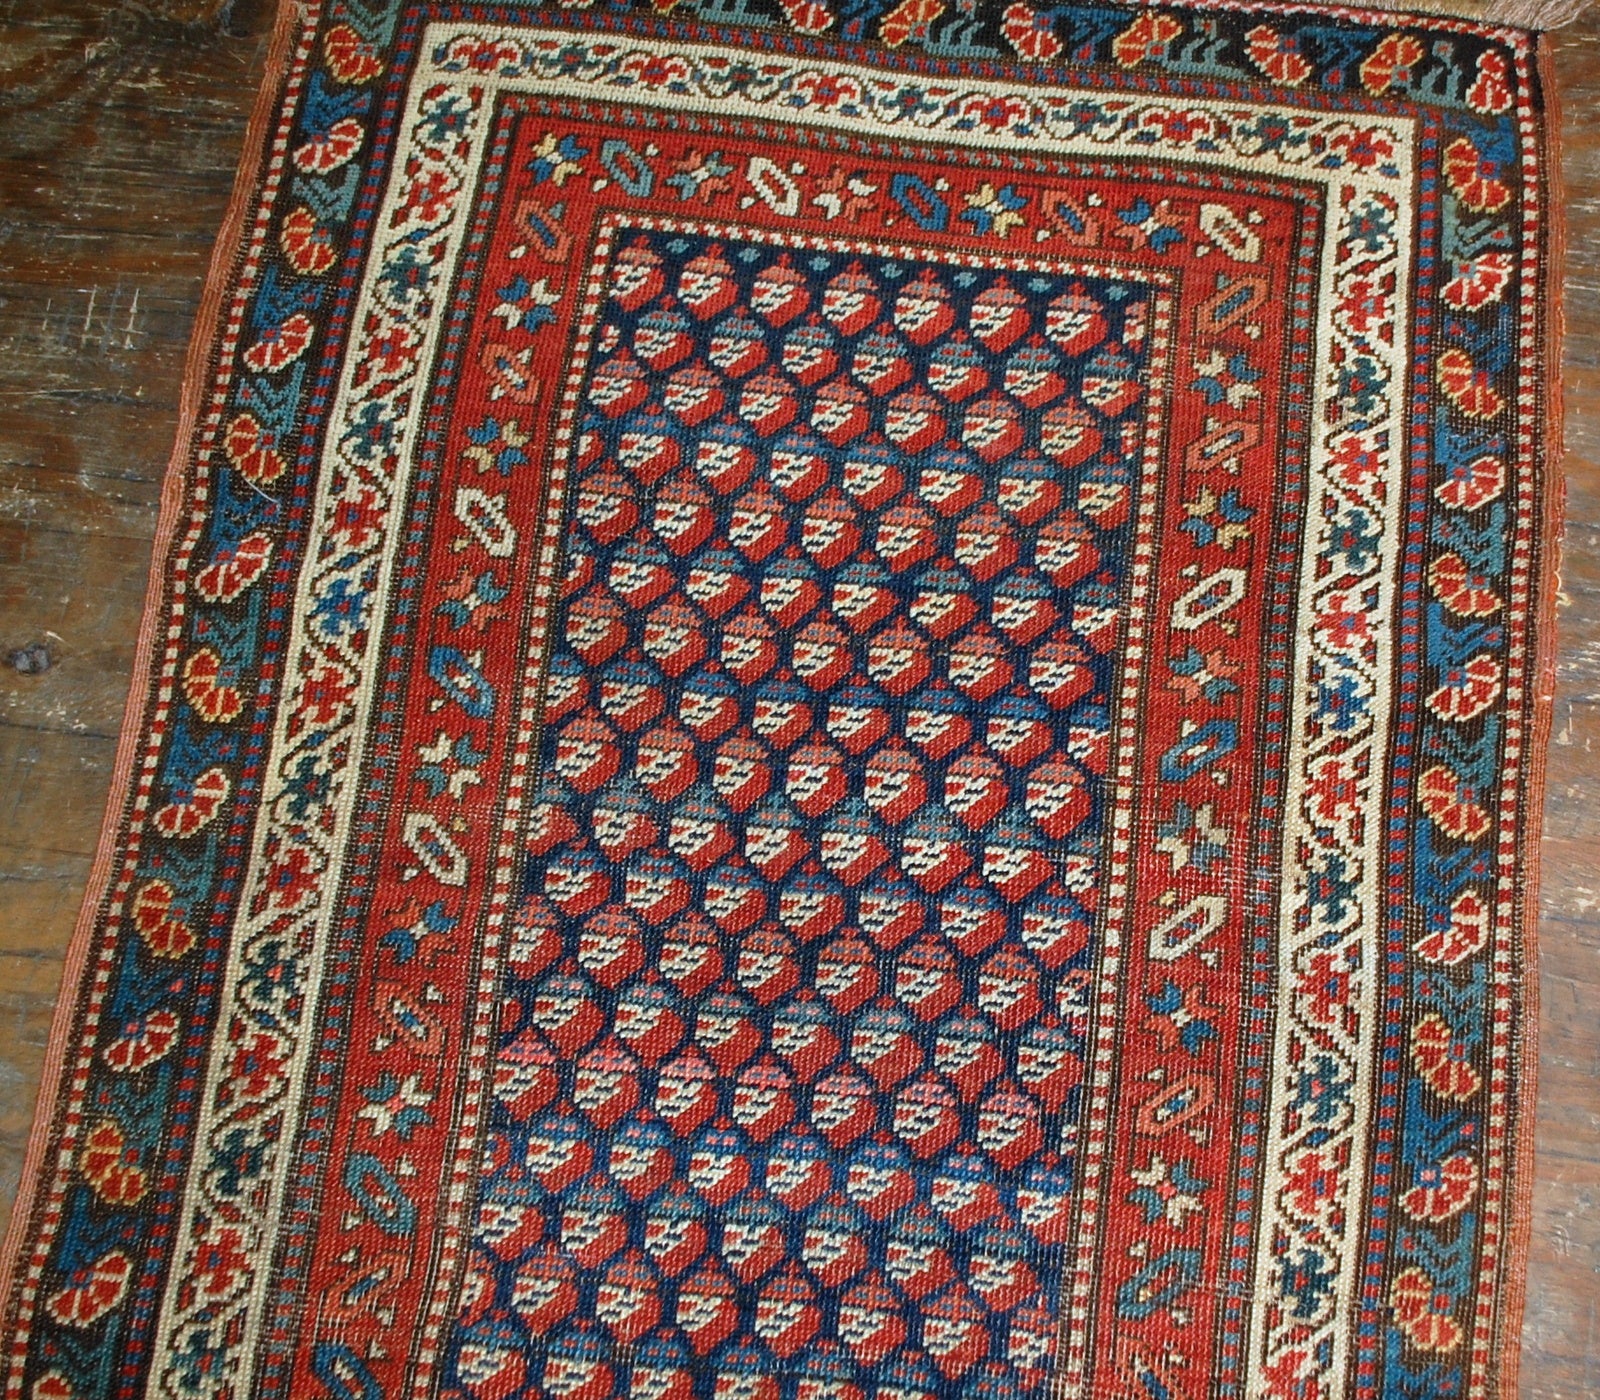 Antique hand made Caucasian Gendje rug in original condition. The rug has navy blue border and all over deign in red shades. 